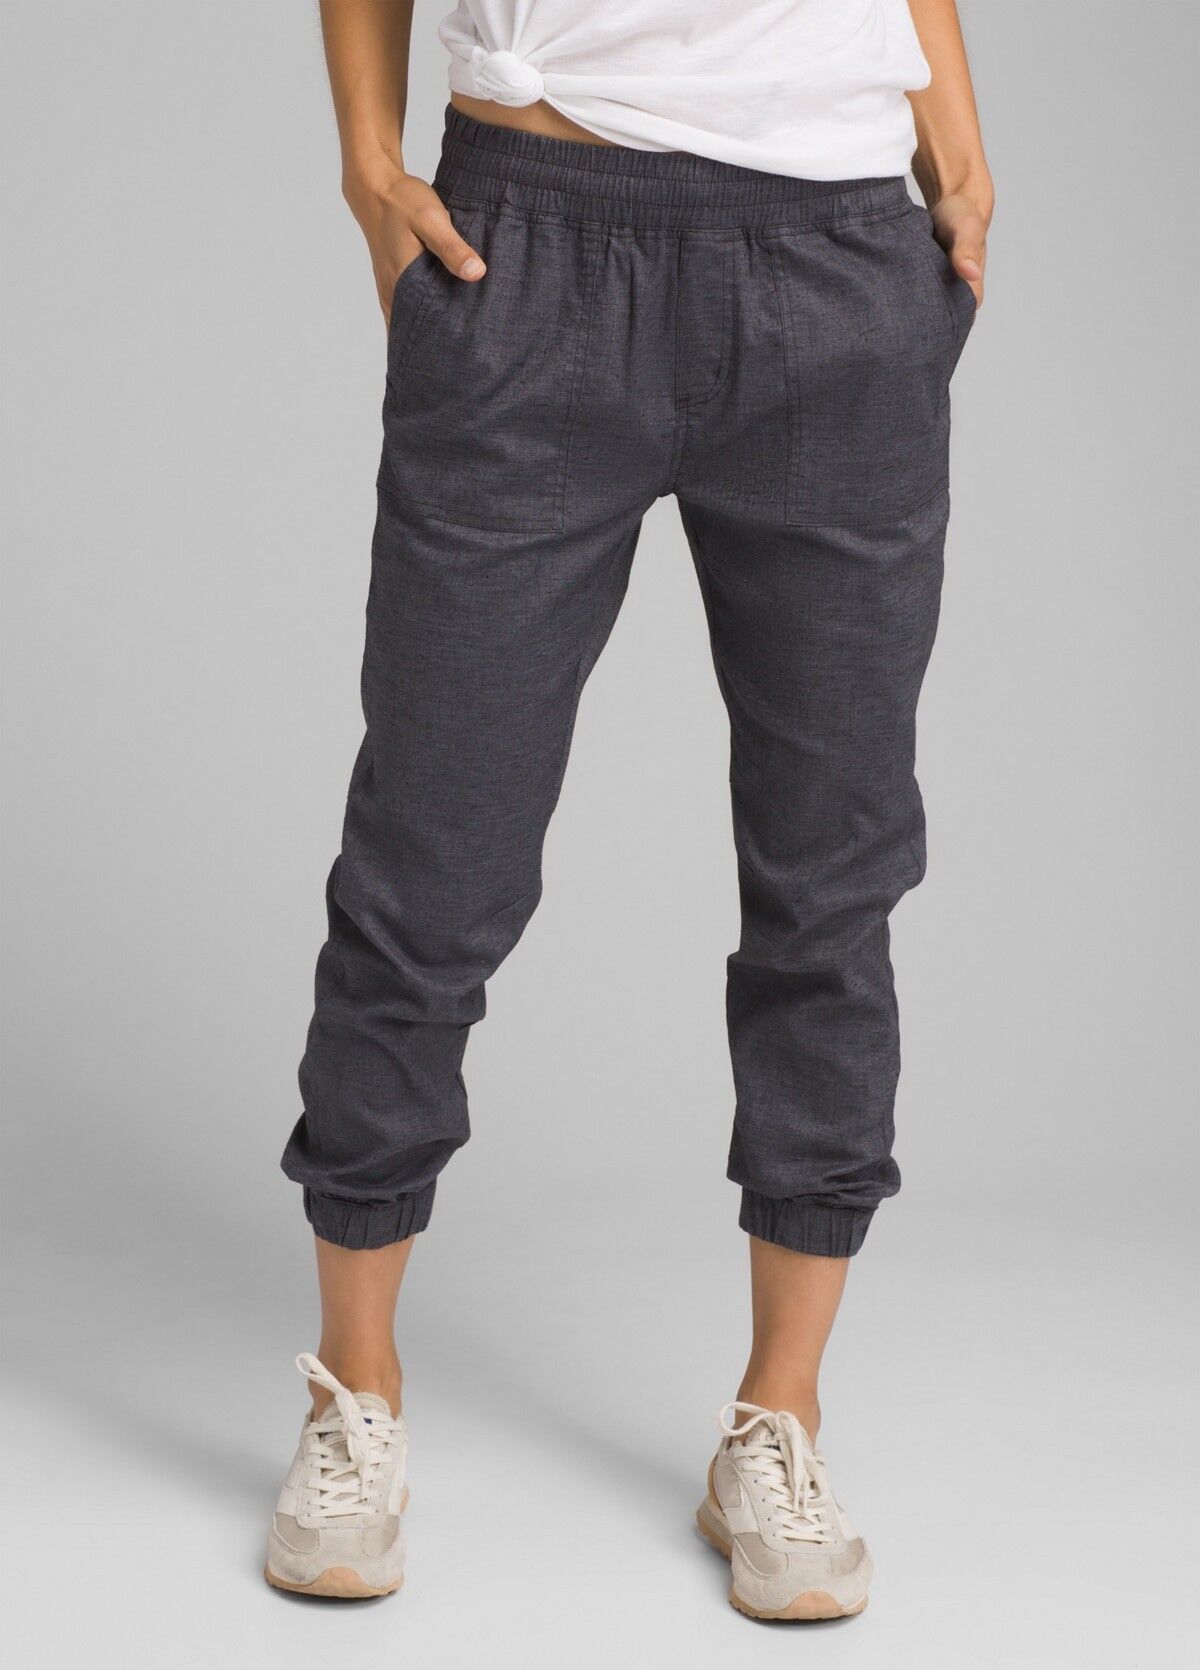 Prana Mantra Jogger - Outdoor trousers - Women's